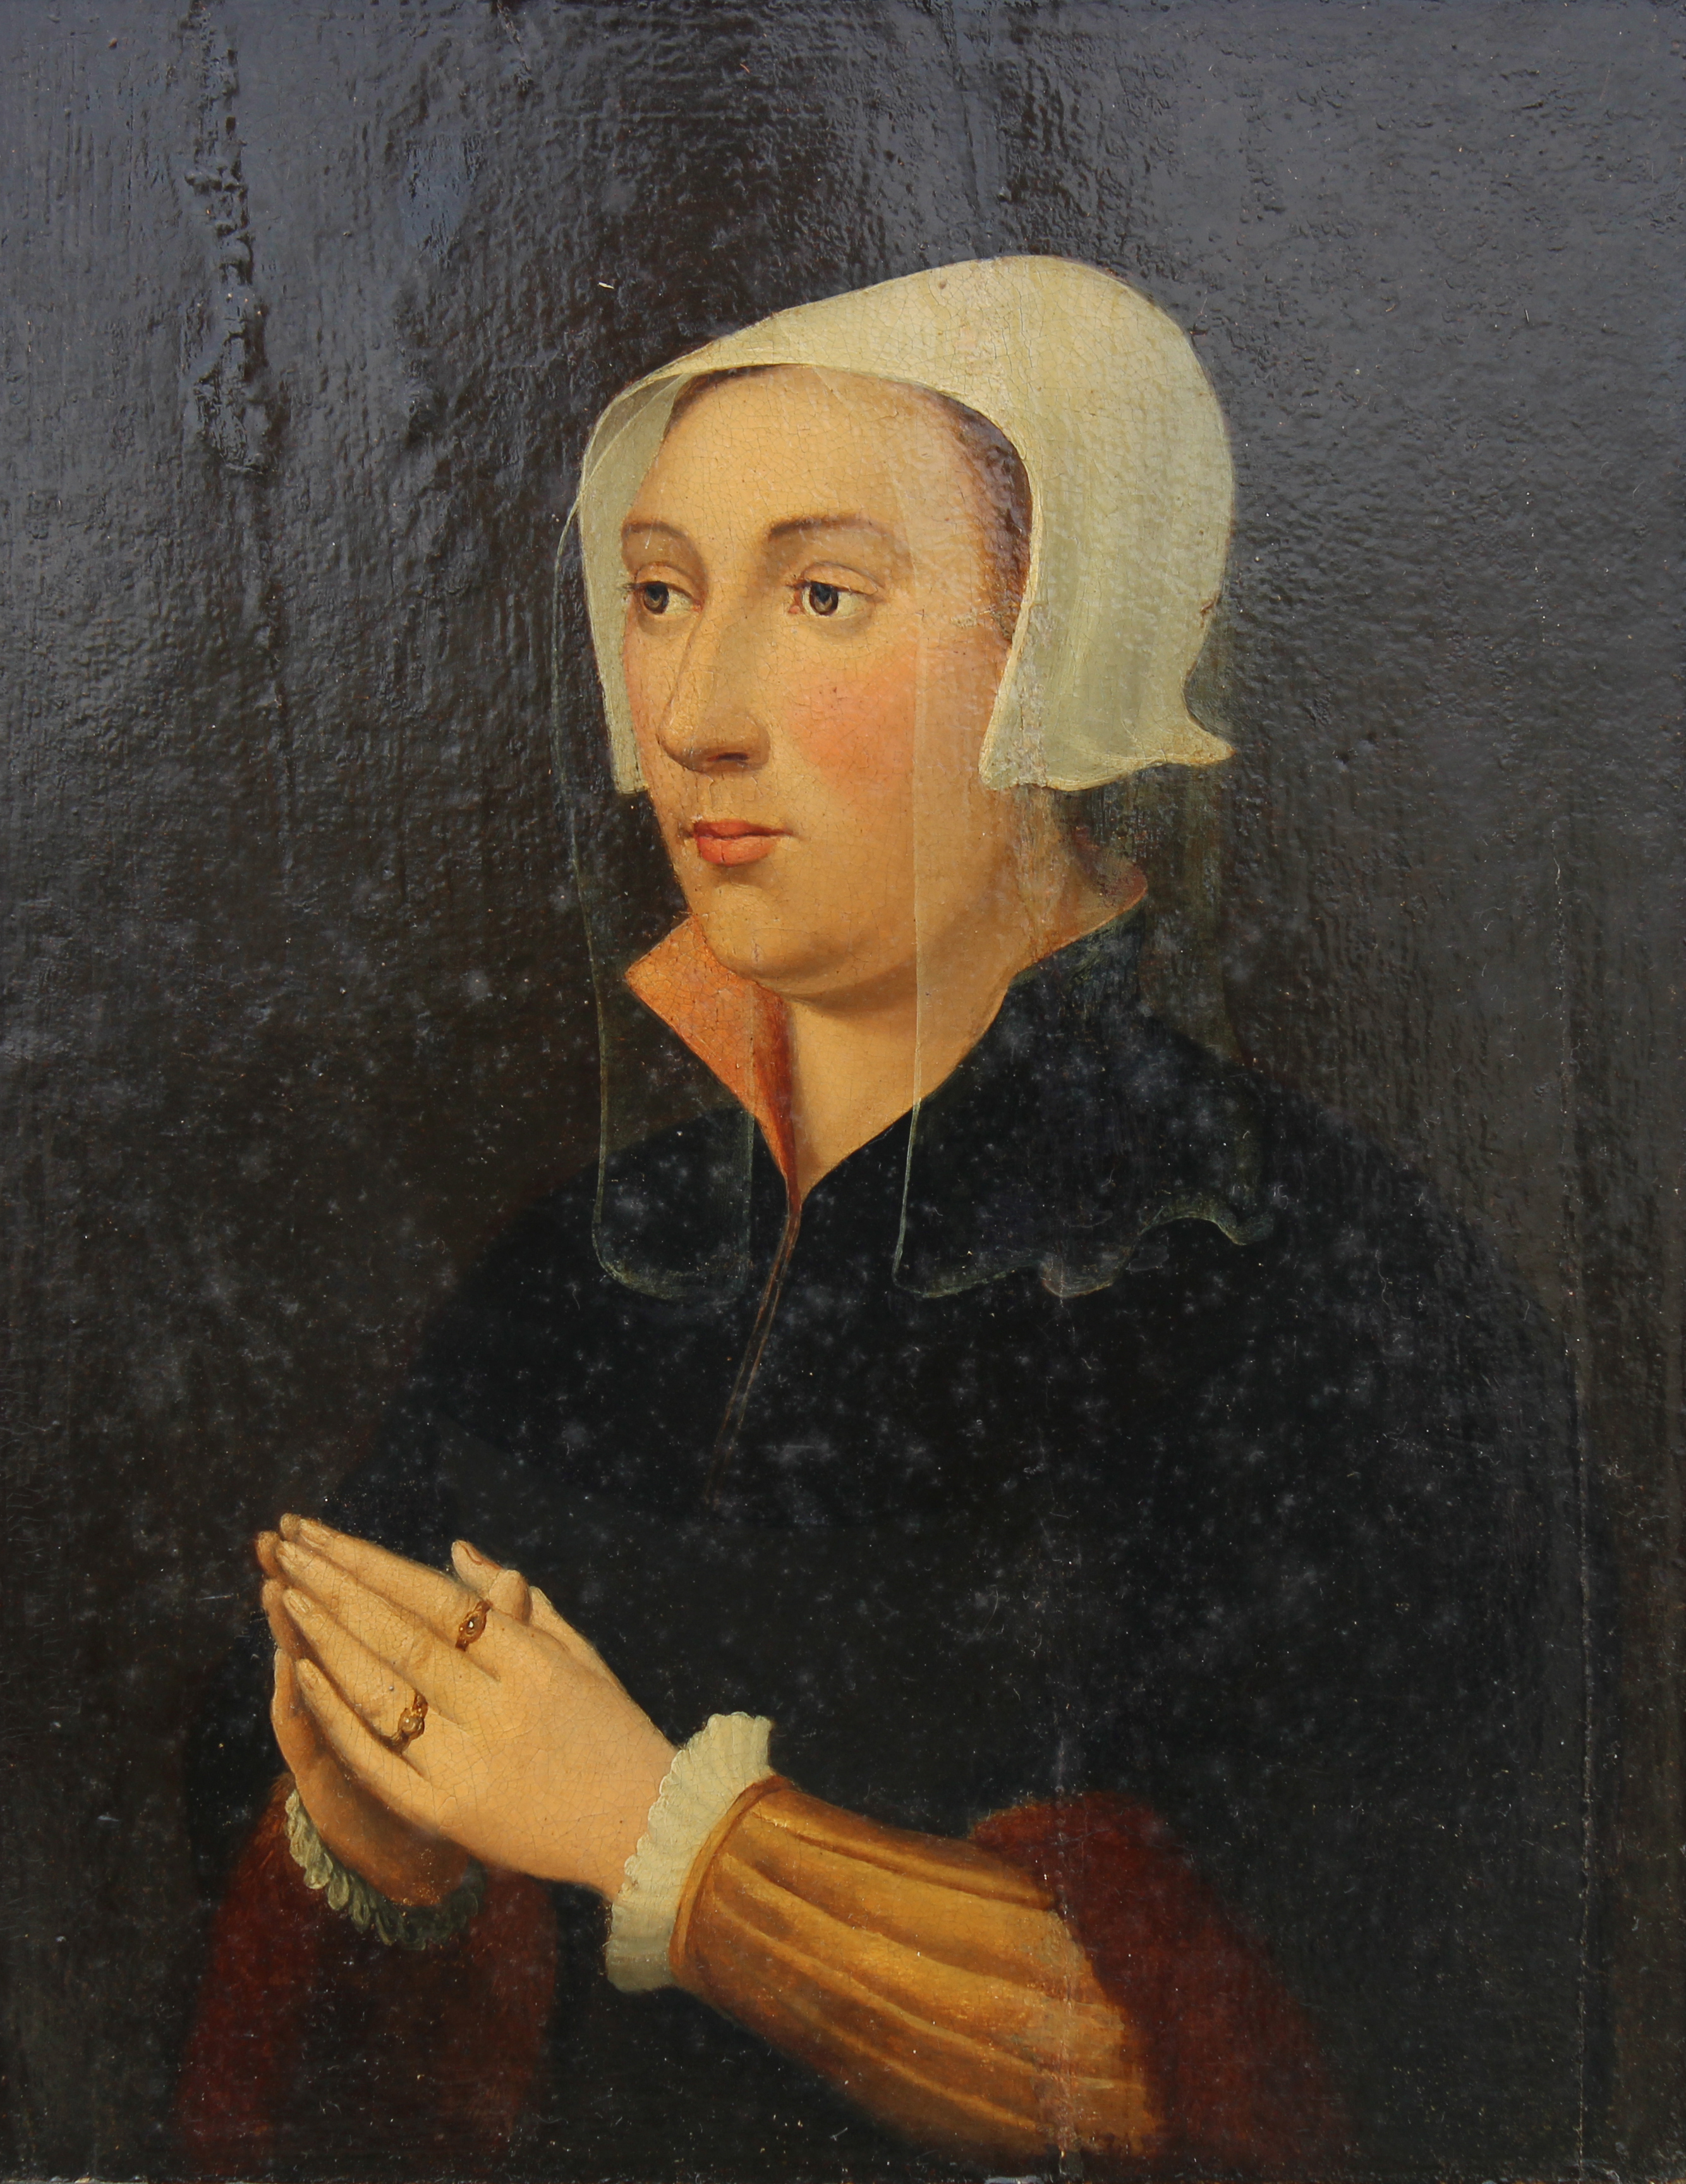 Exceptional 17th C. Dutch Portrait of a Woman - Image 2 of 5